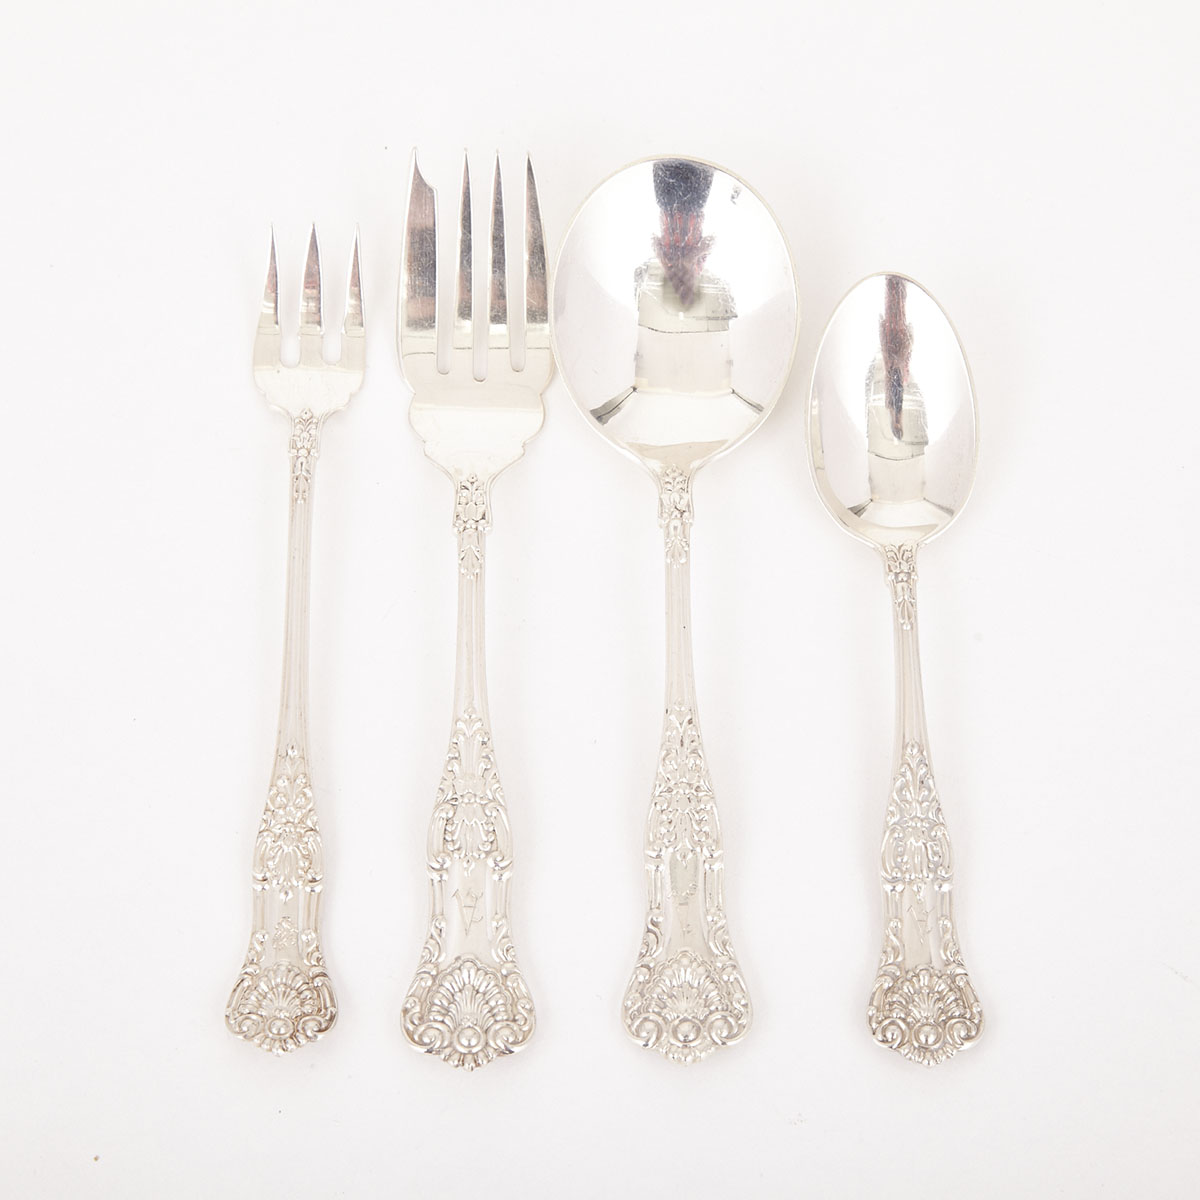 Canadian Silver ‘Queens’ Pattern Flatware Service, Henry Birks & Sons, Montreal, Que., 20th century